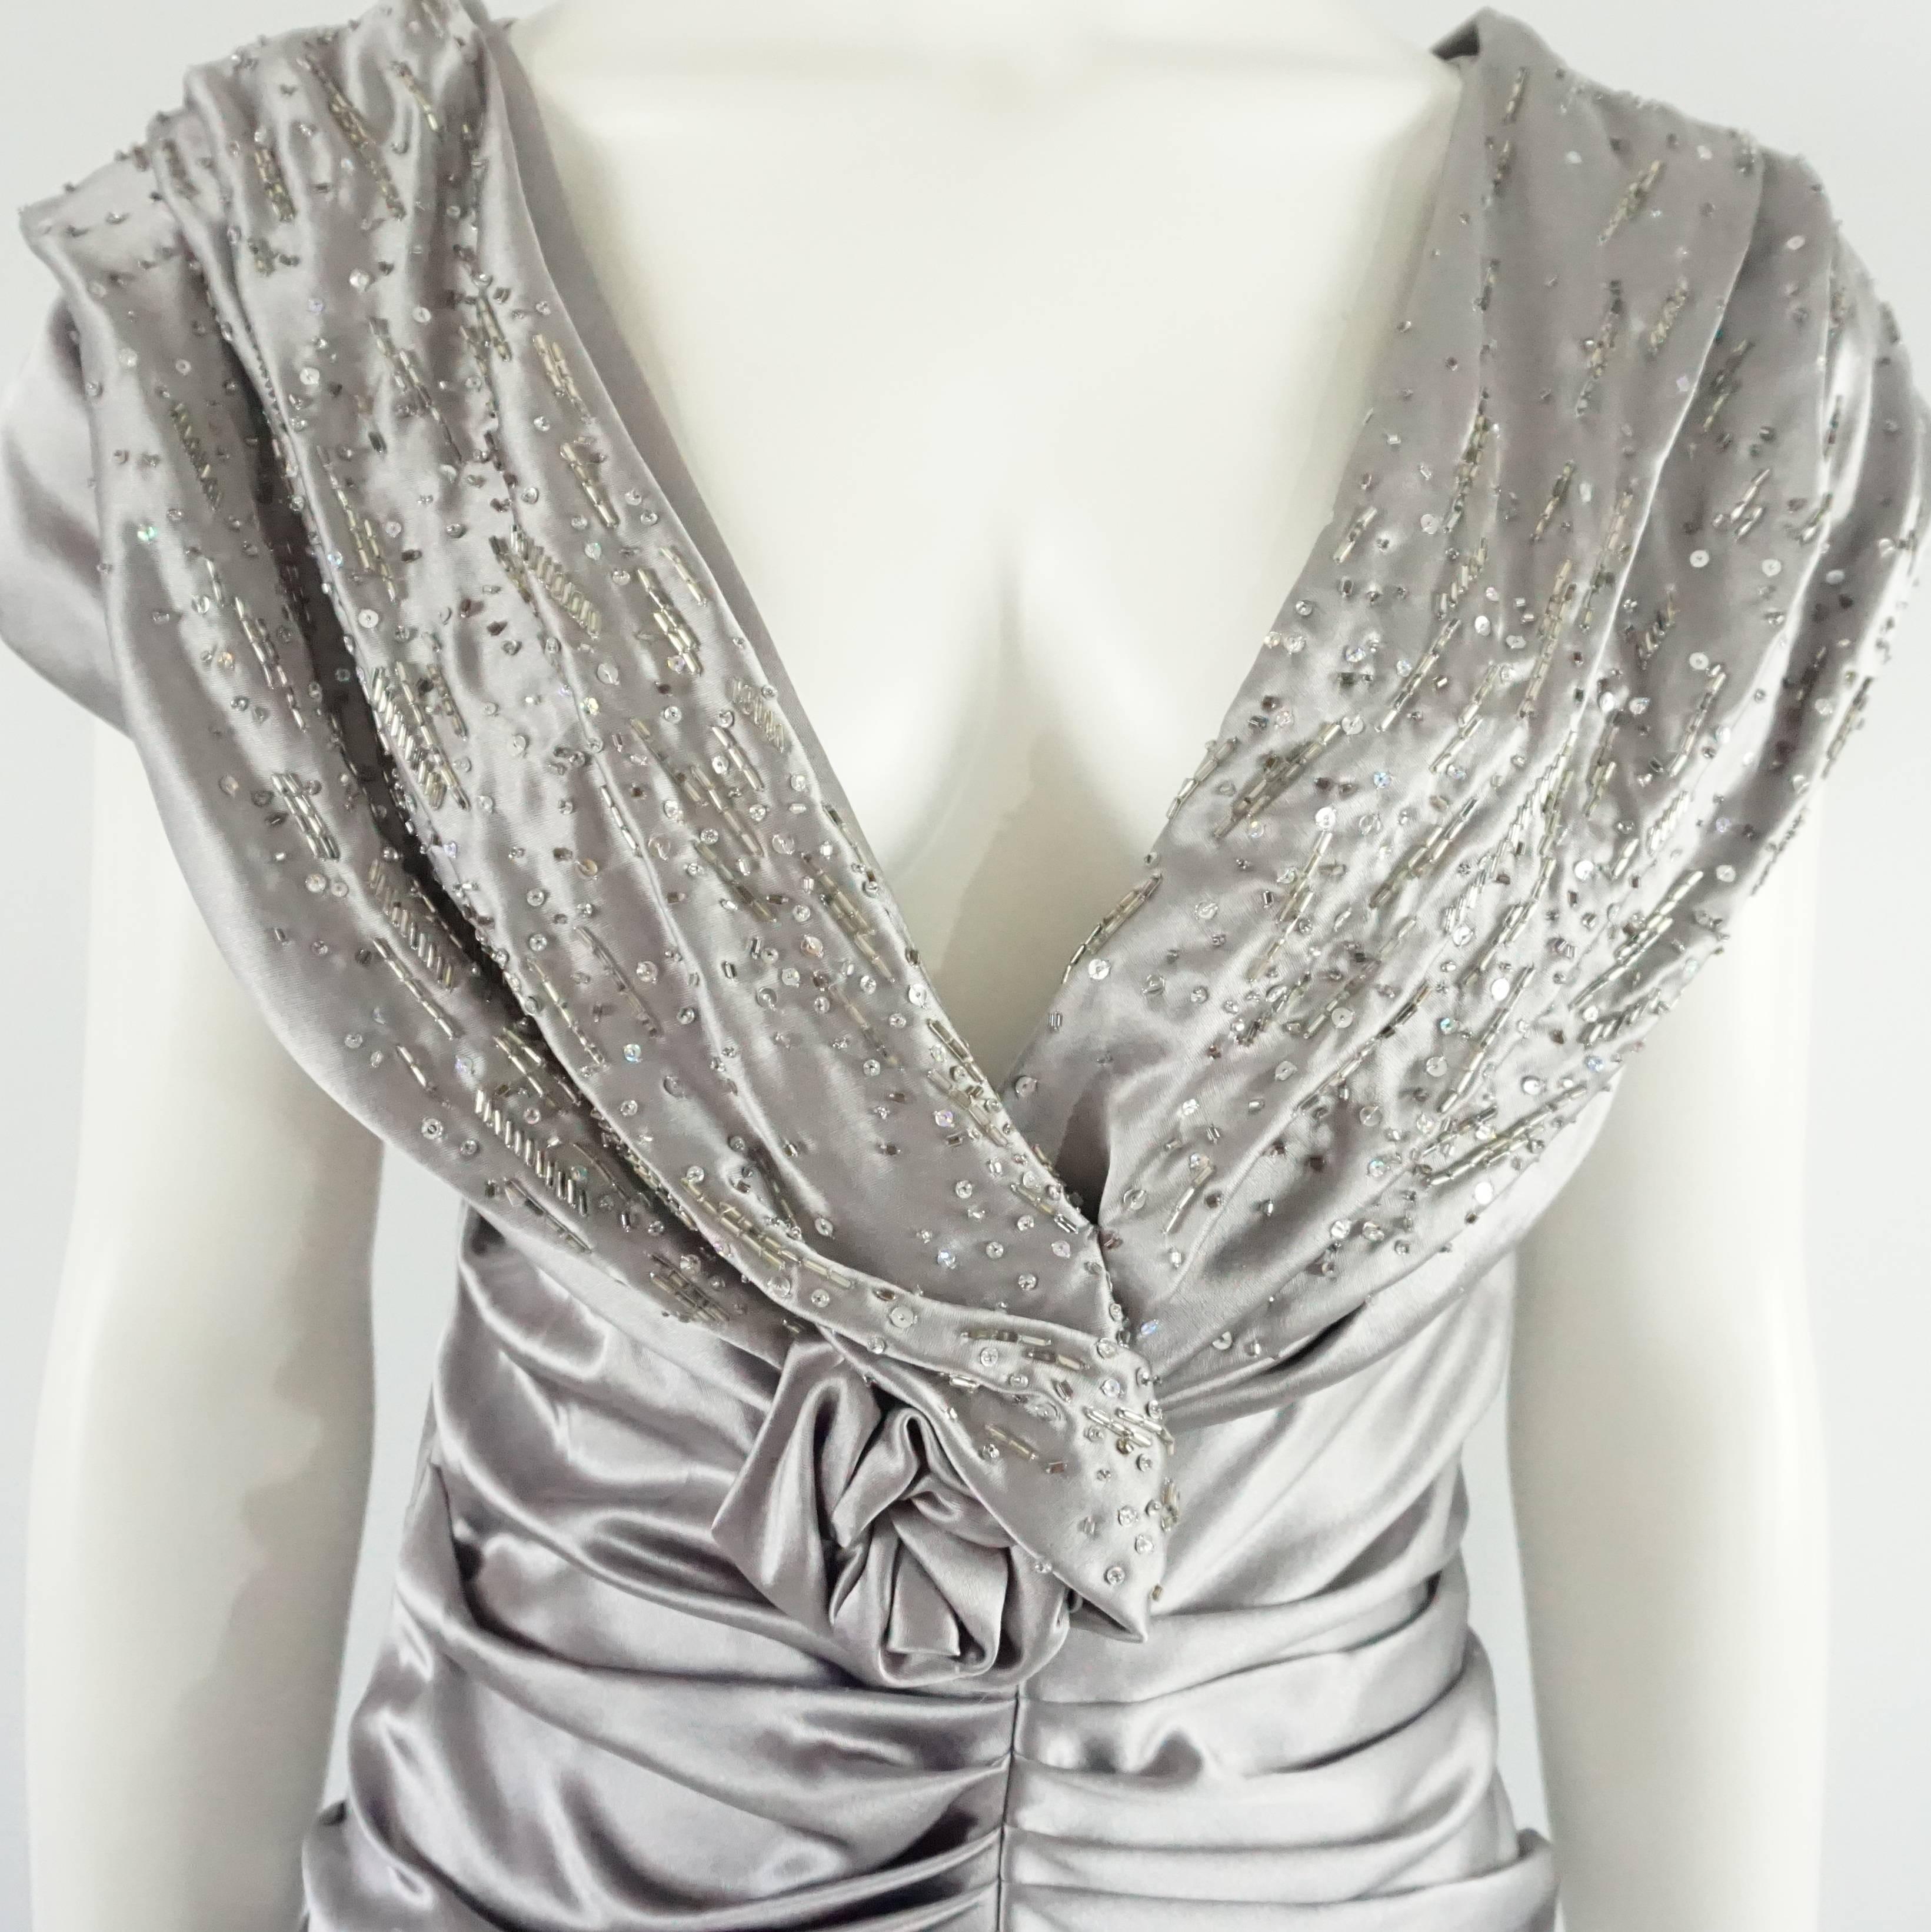 Women's Christian Dior Silver Satin Ruched Beaded Dress - 46